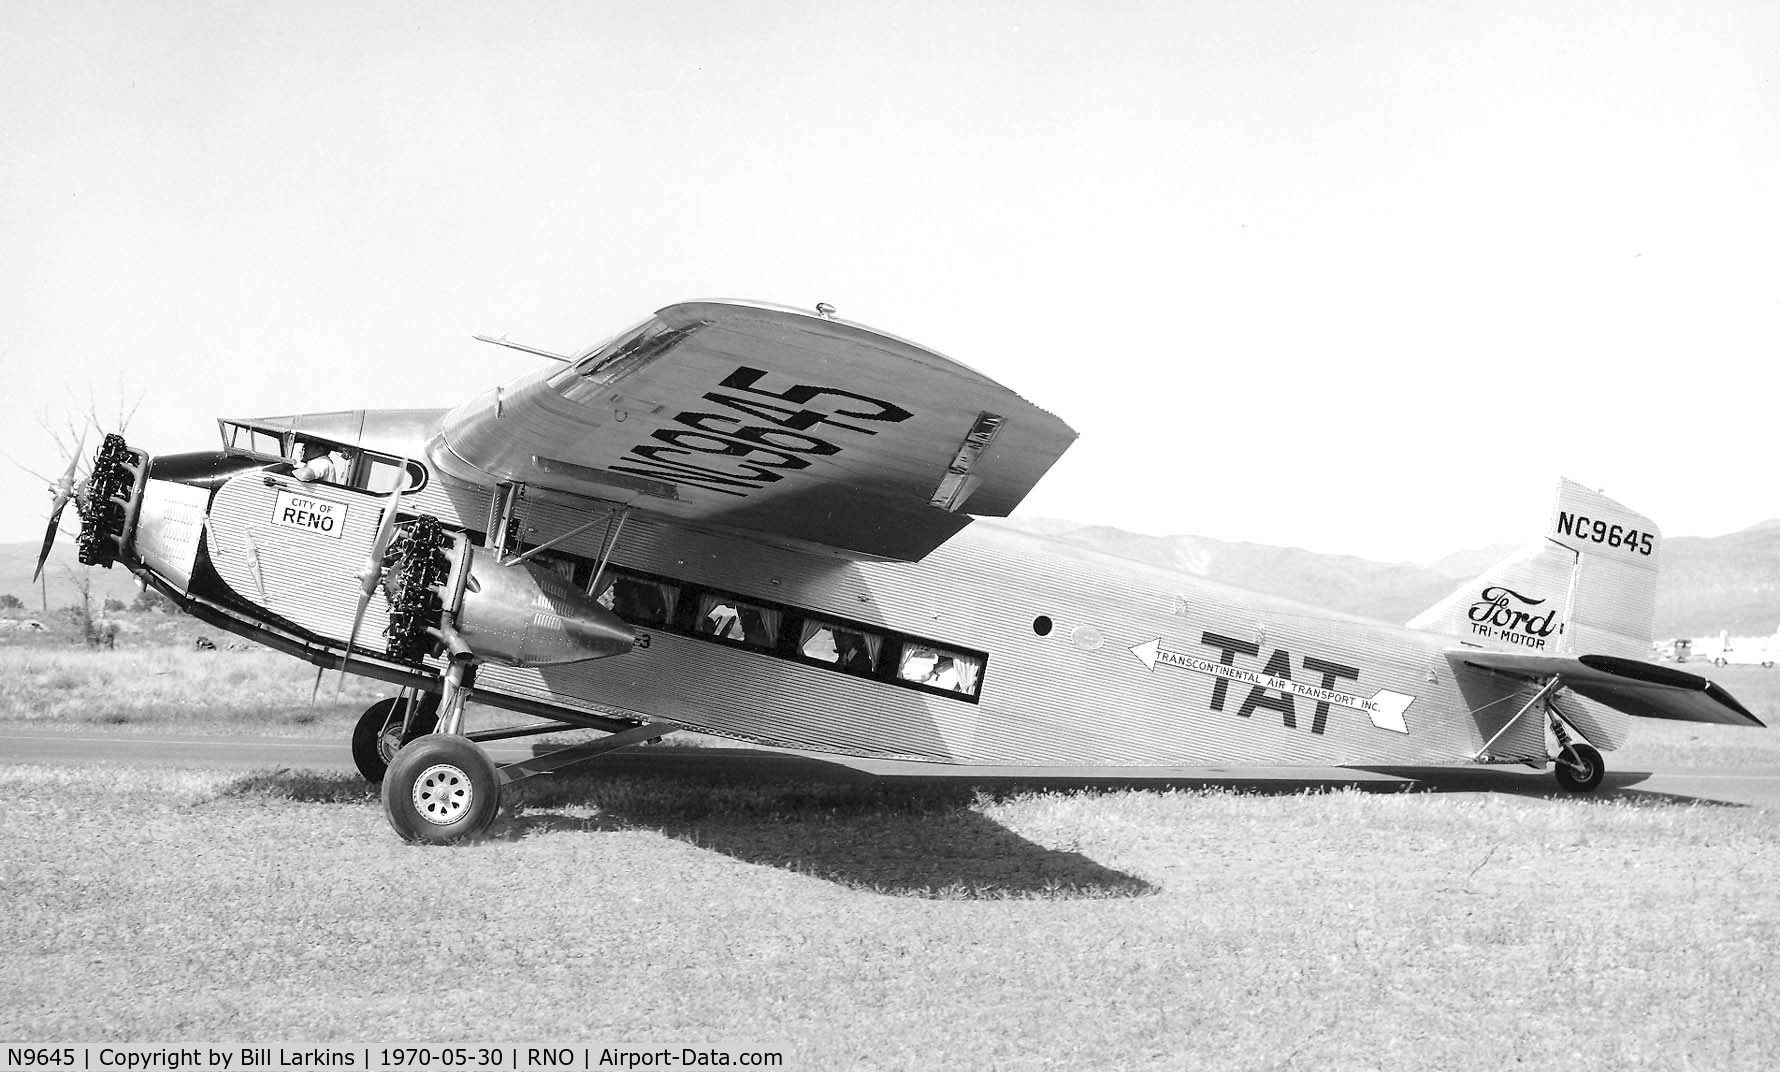 N9645, 1928 Ford 5-AT-B Tri-Motor C/N 8, Reno, May 30, 1970. First official flights the next day after years of reconstruction by Harrah's shop.